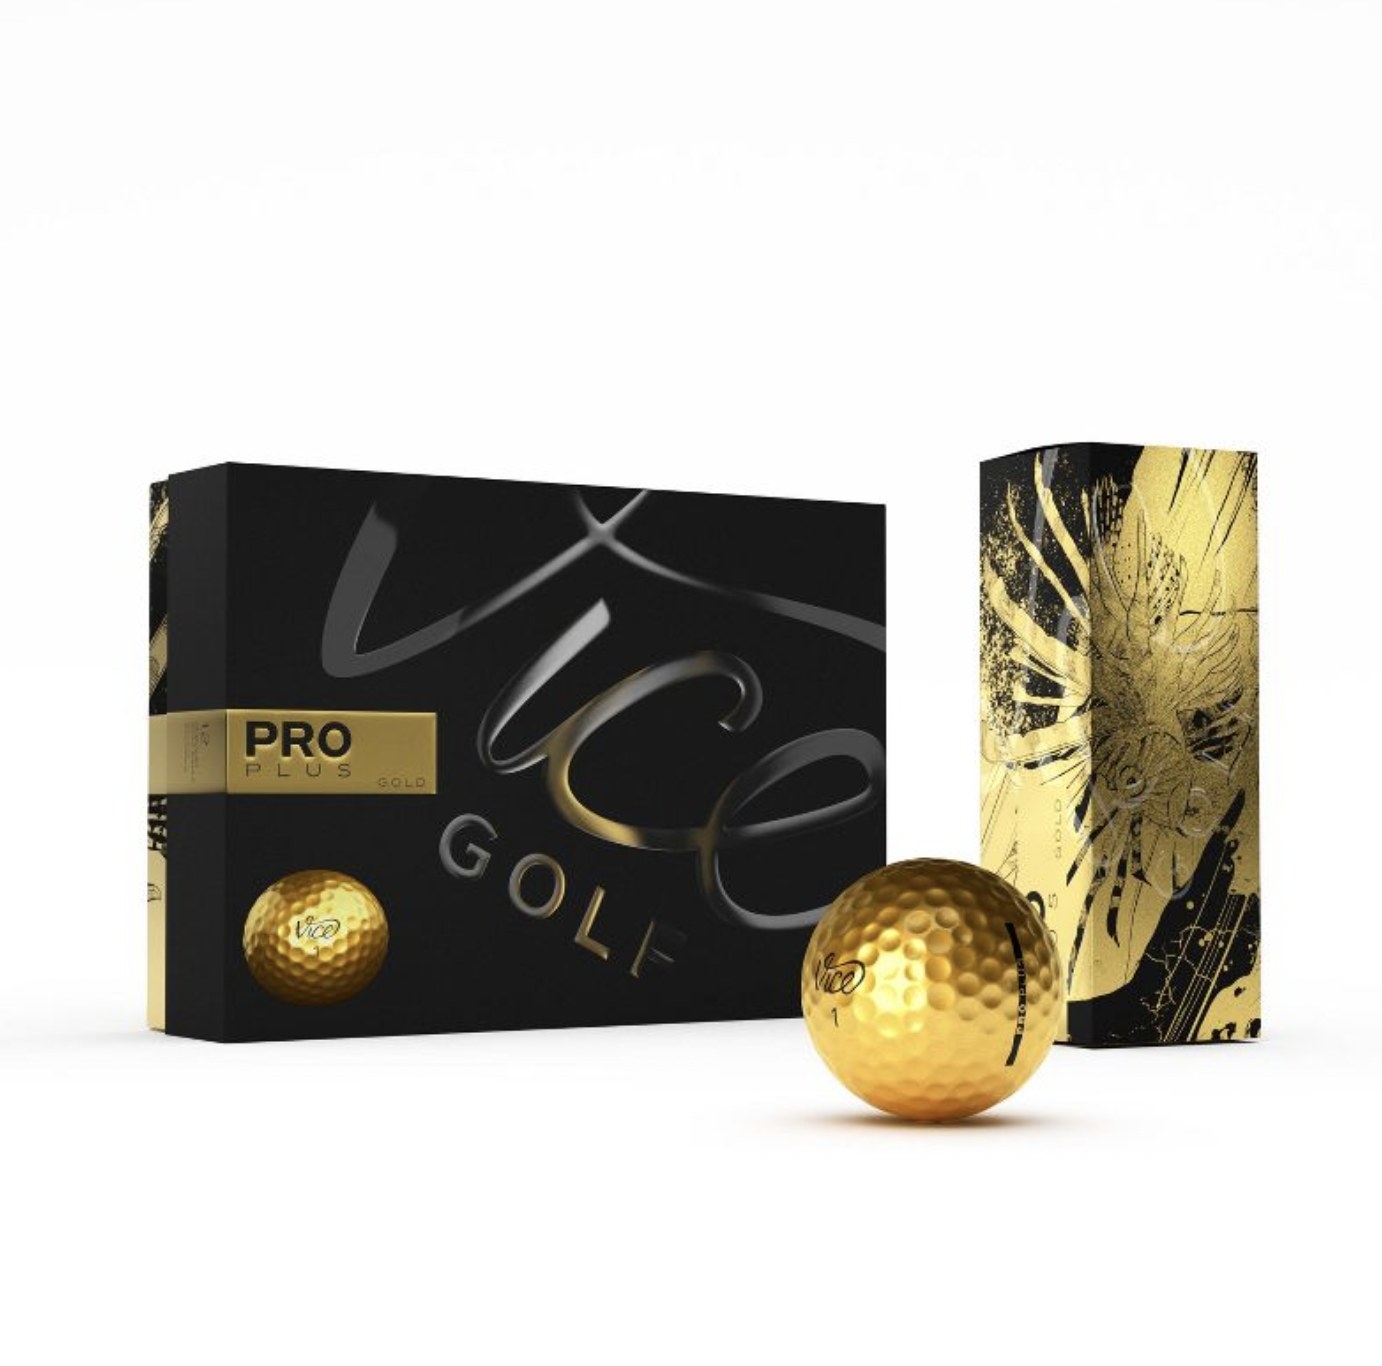 the gold Vice golf ball